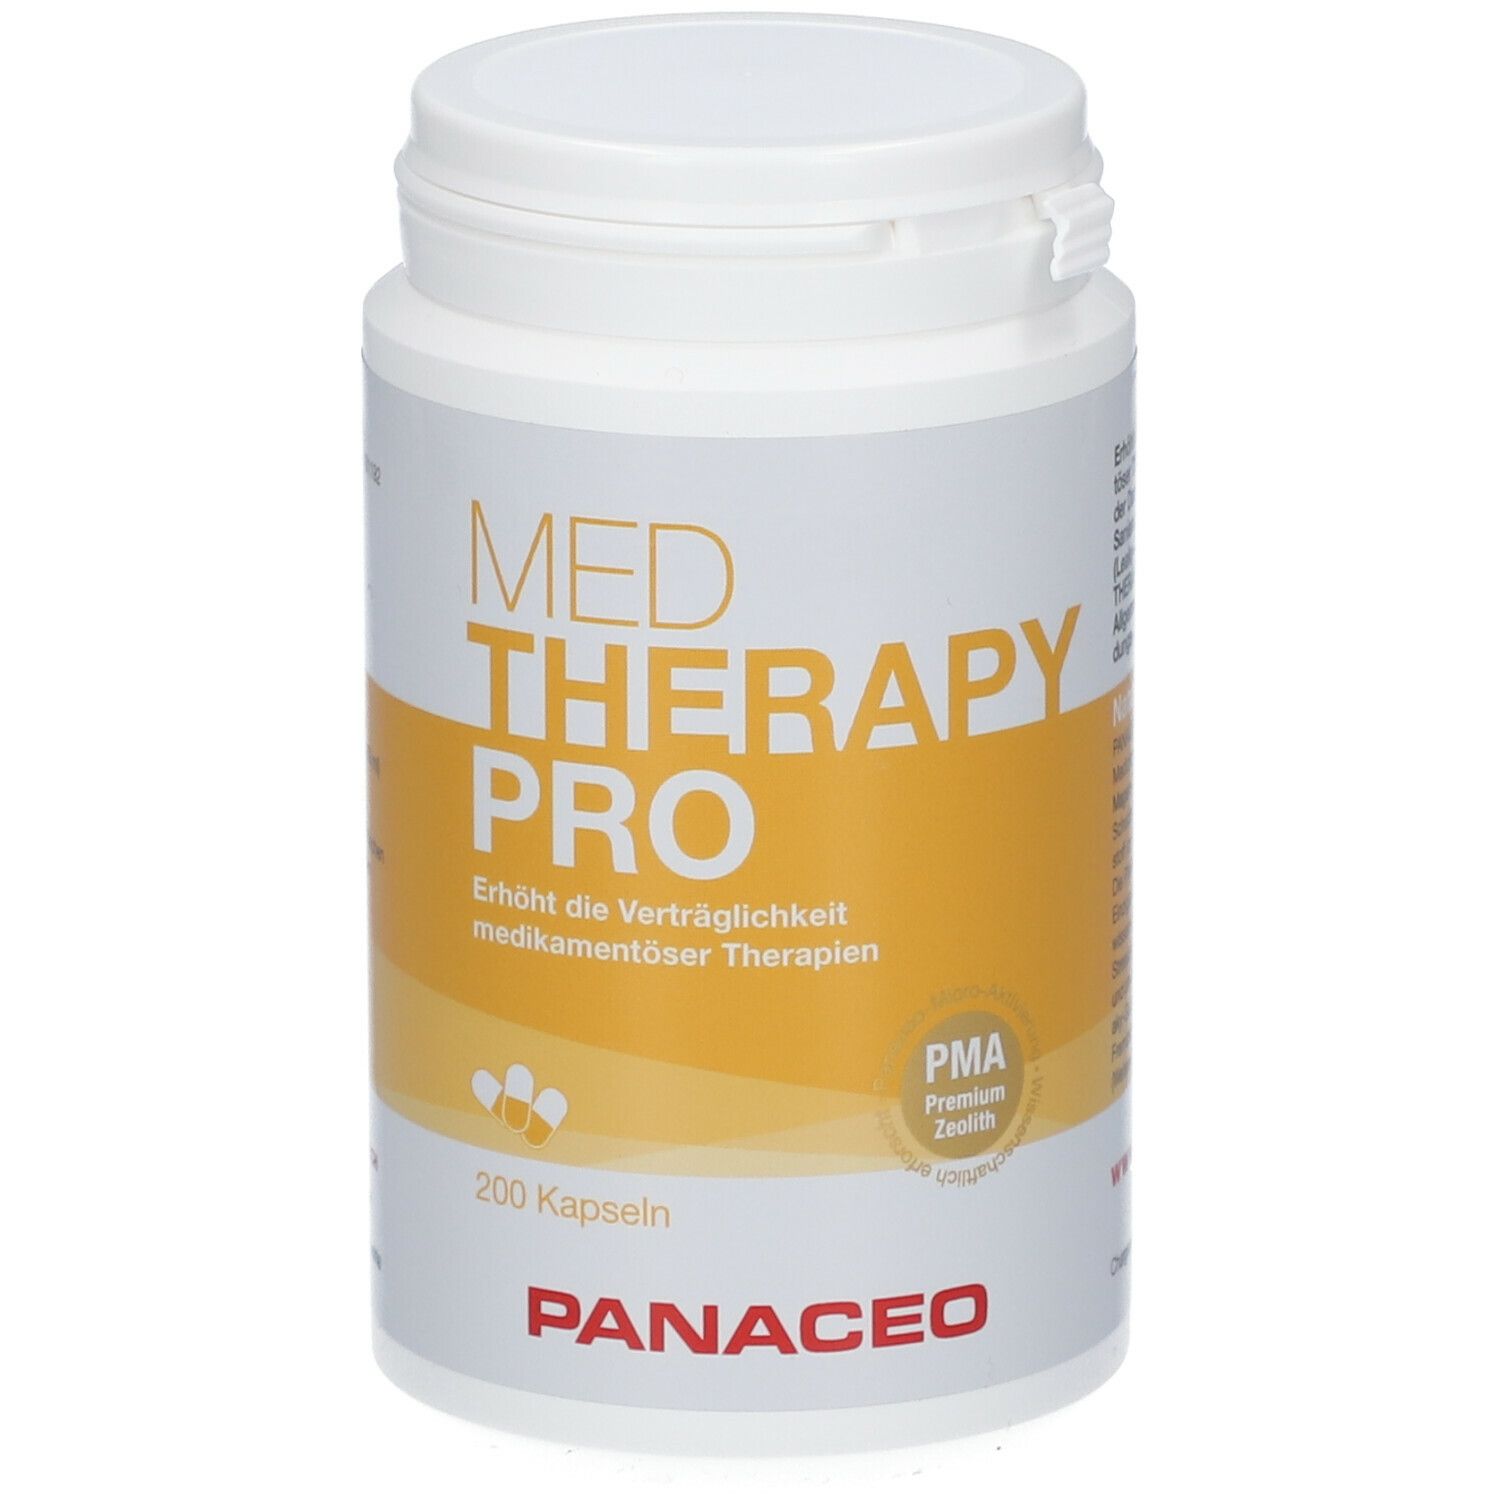 PANACEO MED THERAPY-PRO